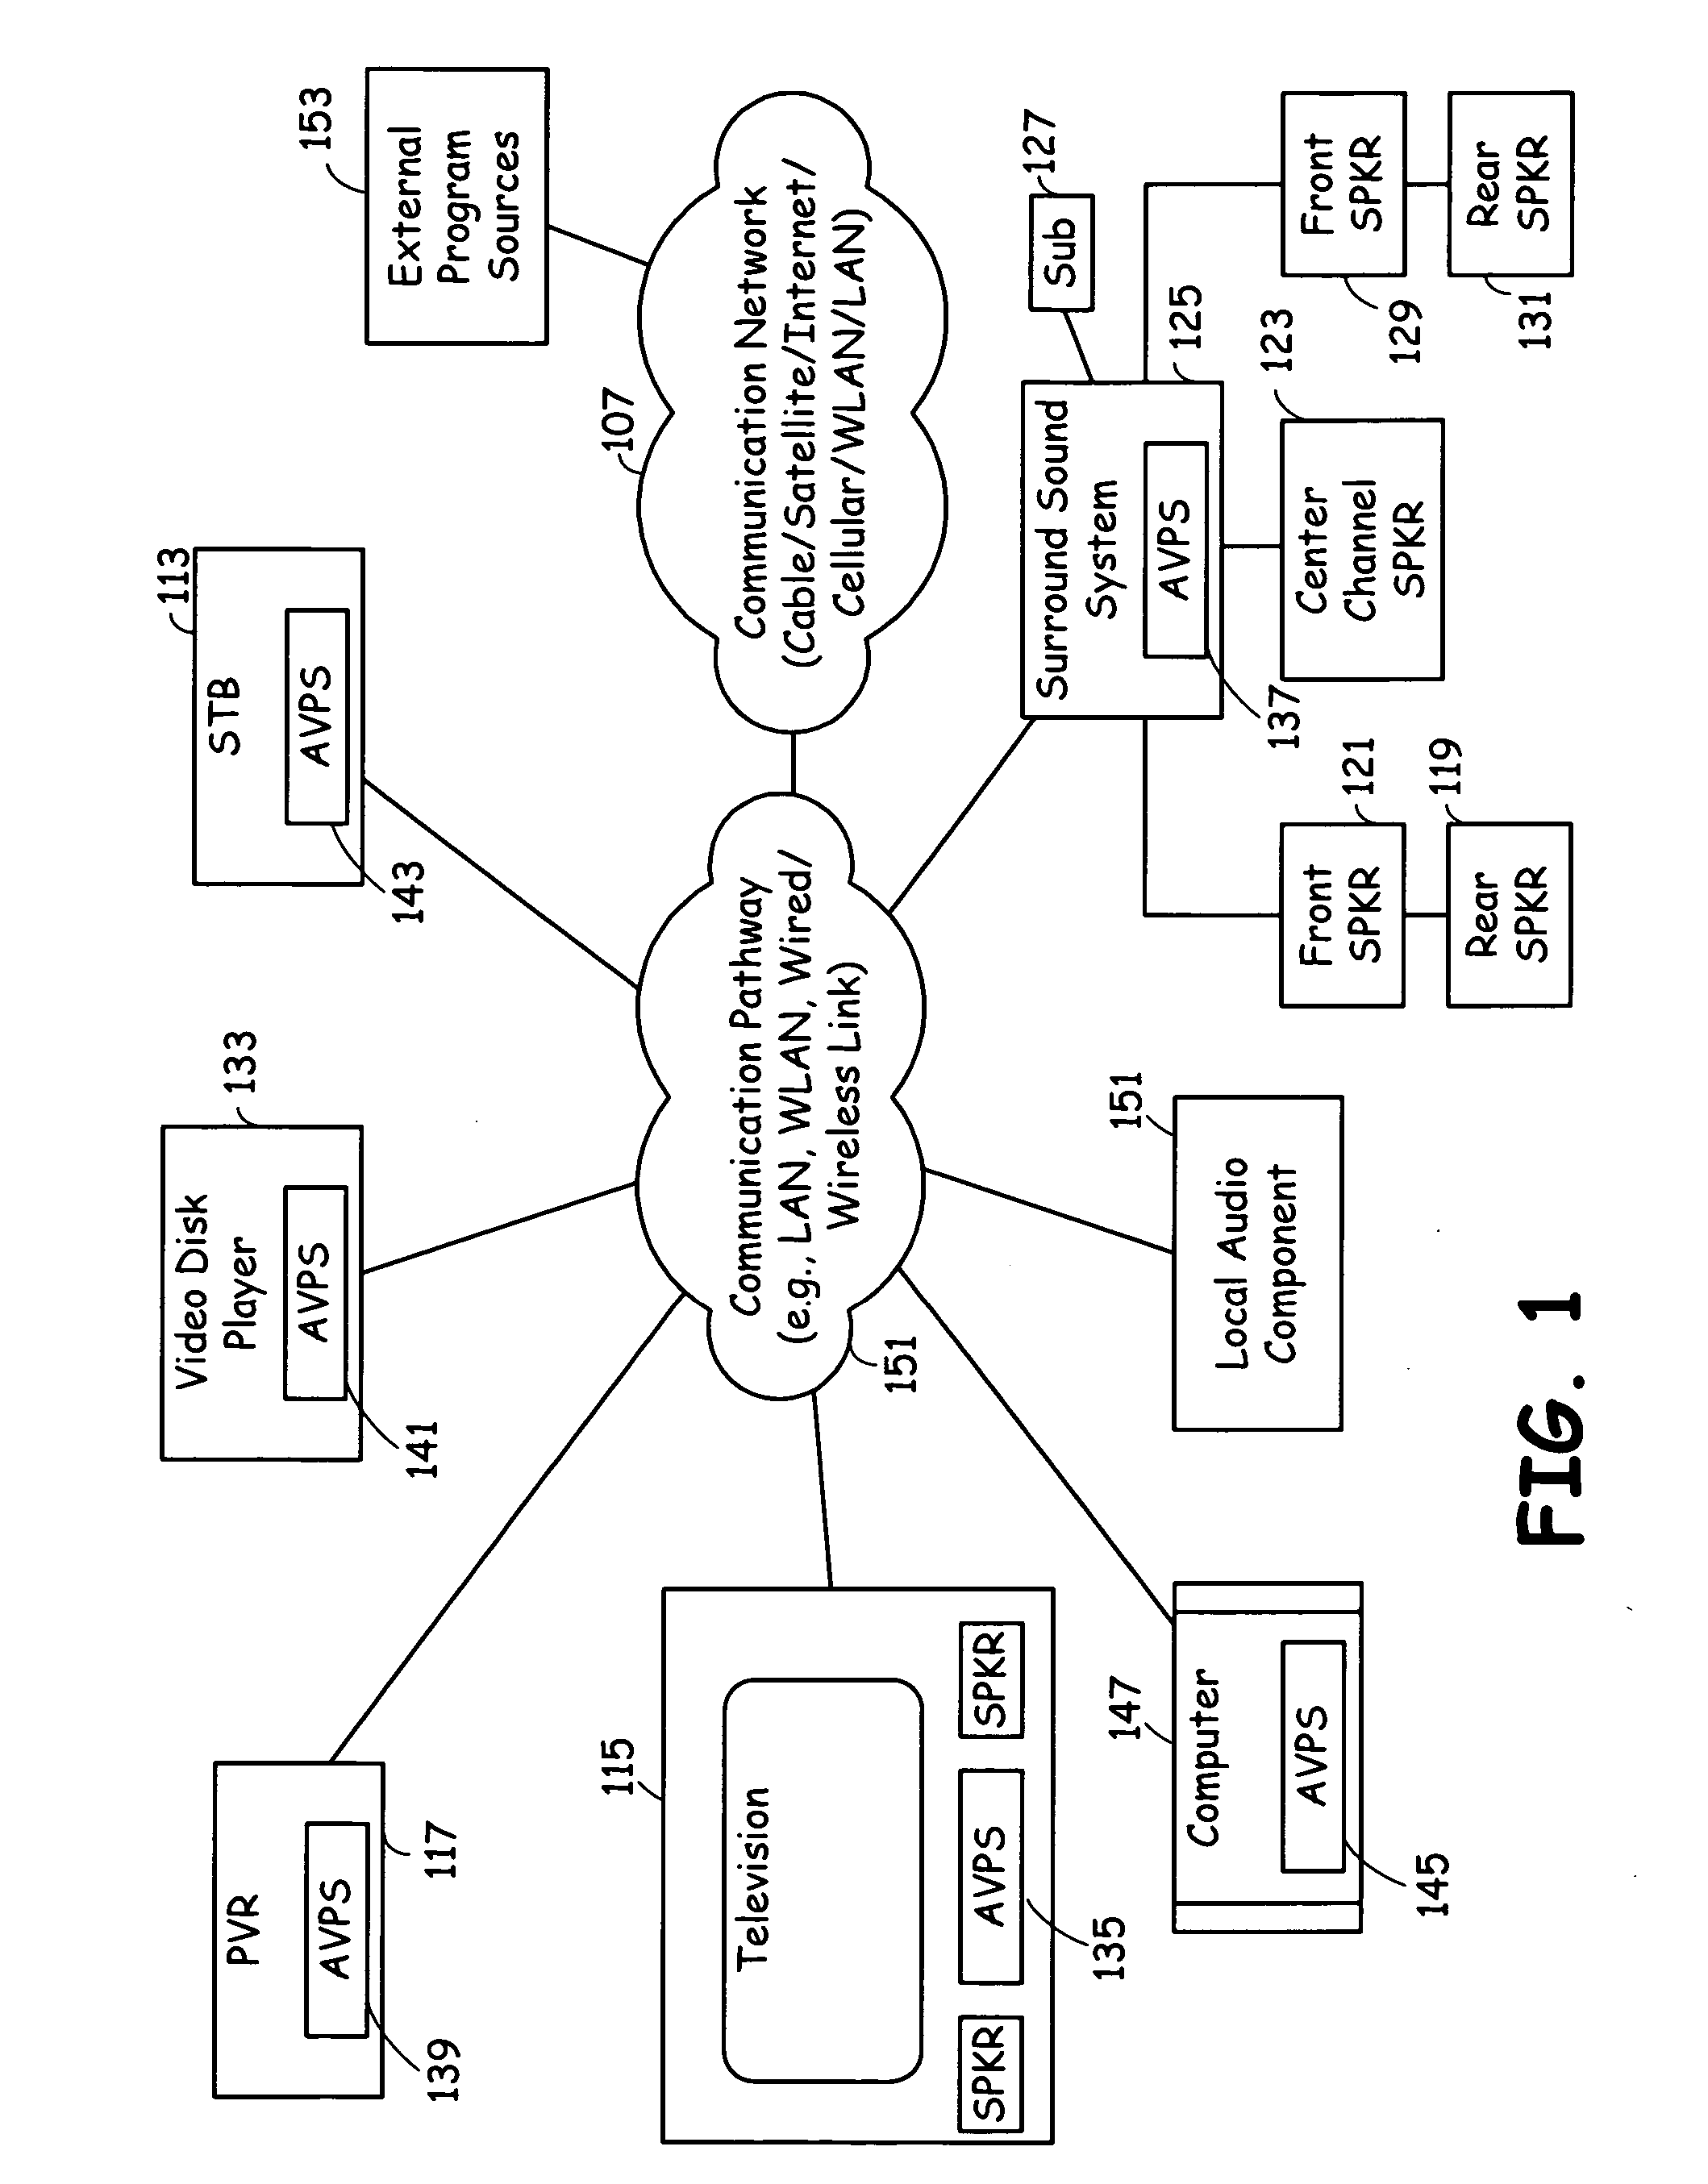 Audio-video systems supporting merged audio streams